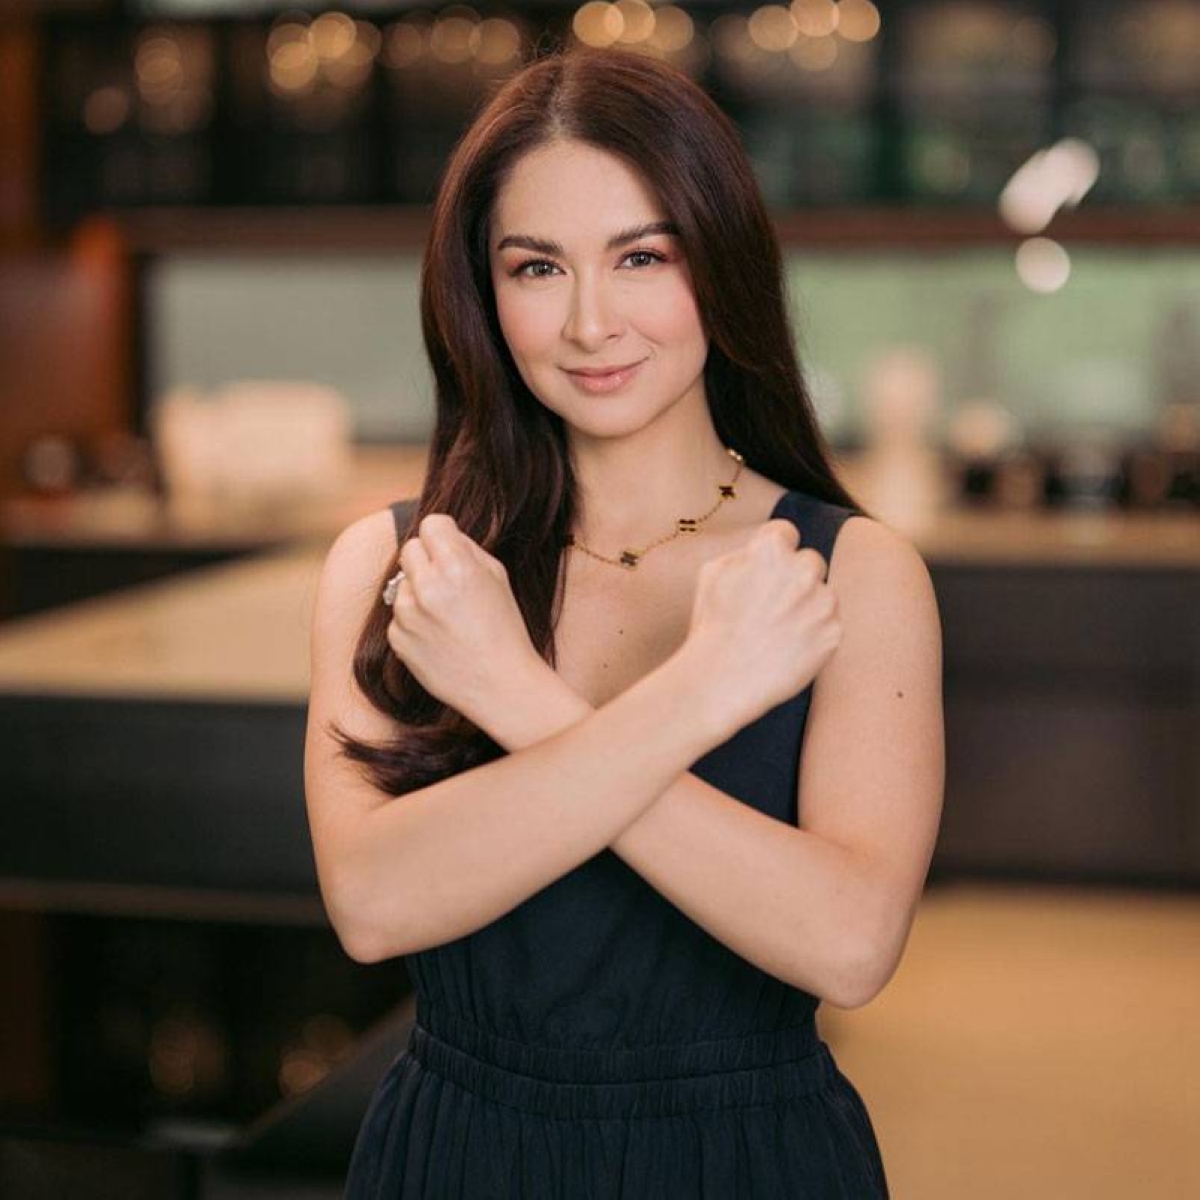 As a health advocate, Marian Rivera stresses the importance of not compromising on her family’s health, even for a cough. INSTAGRAM PHOTO